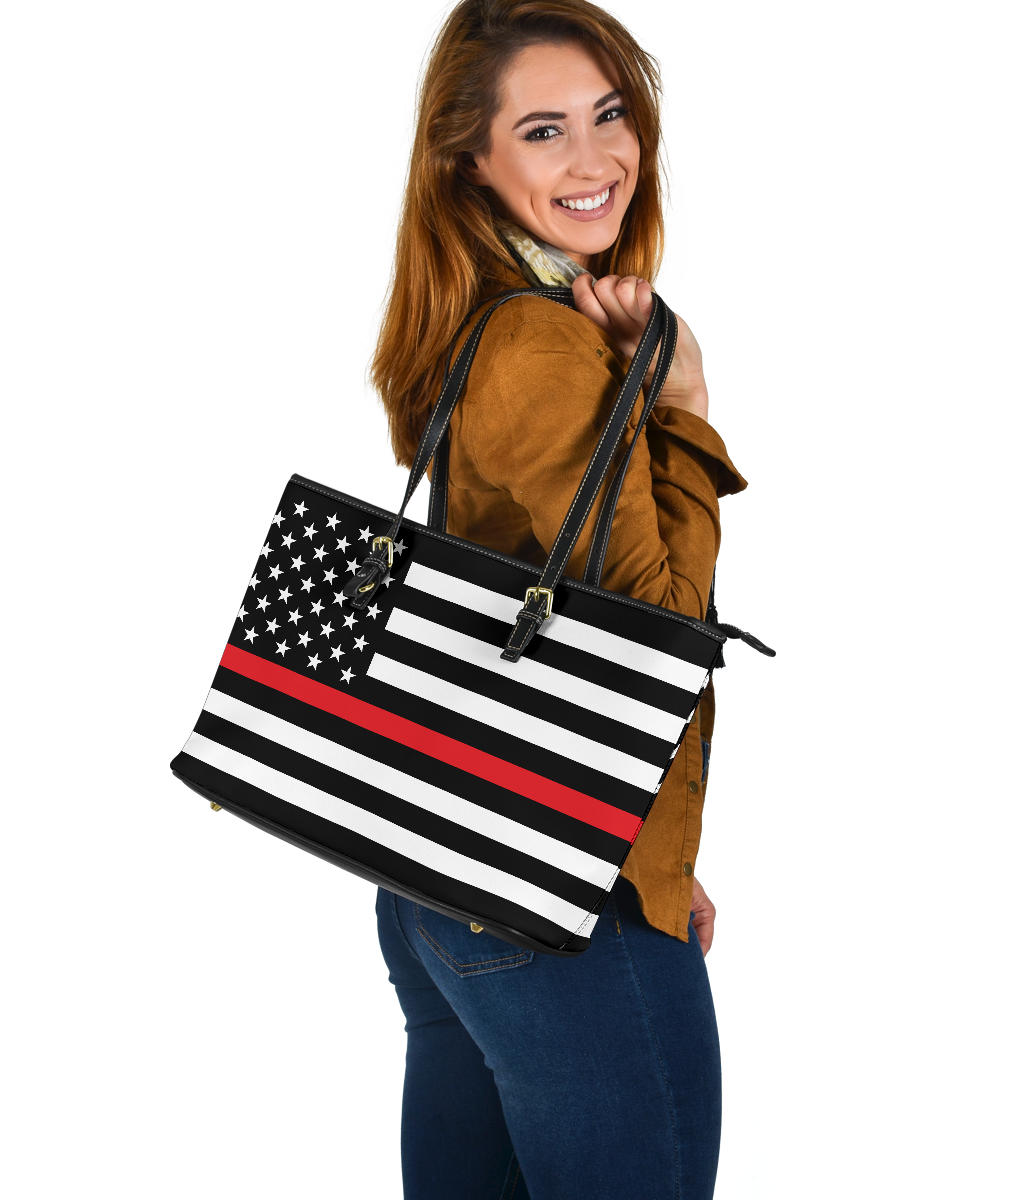 Thin Red Line Flag Firefighter Large PU Faux Leather Tote Bag